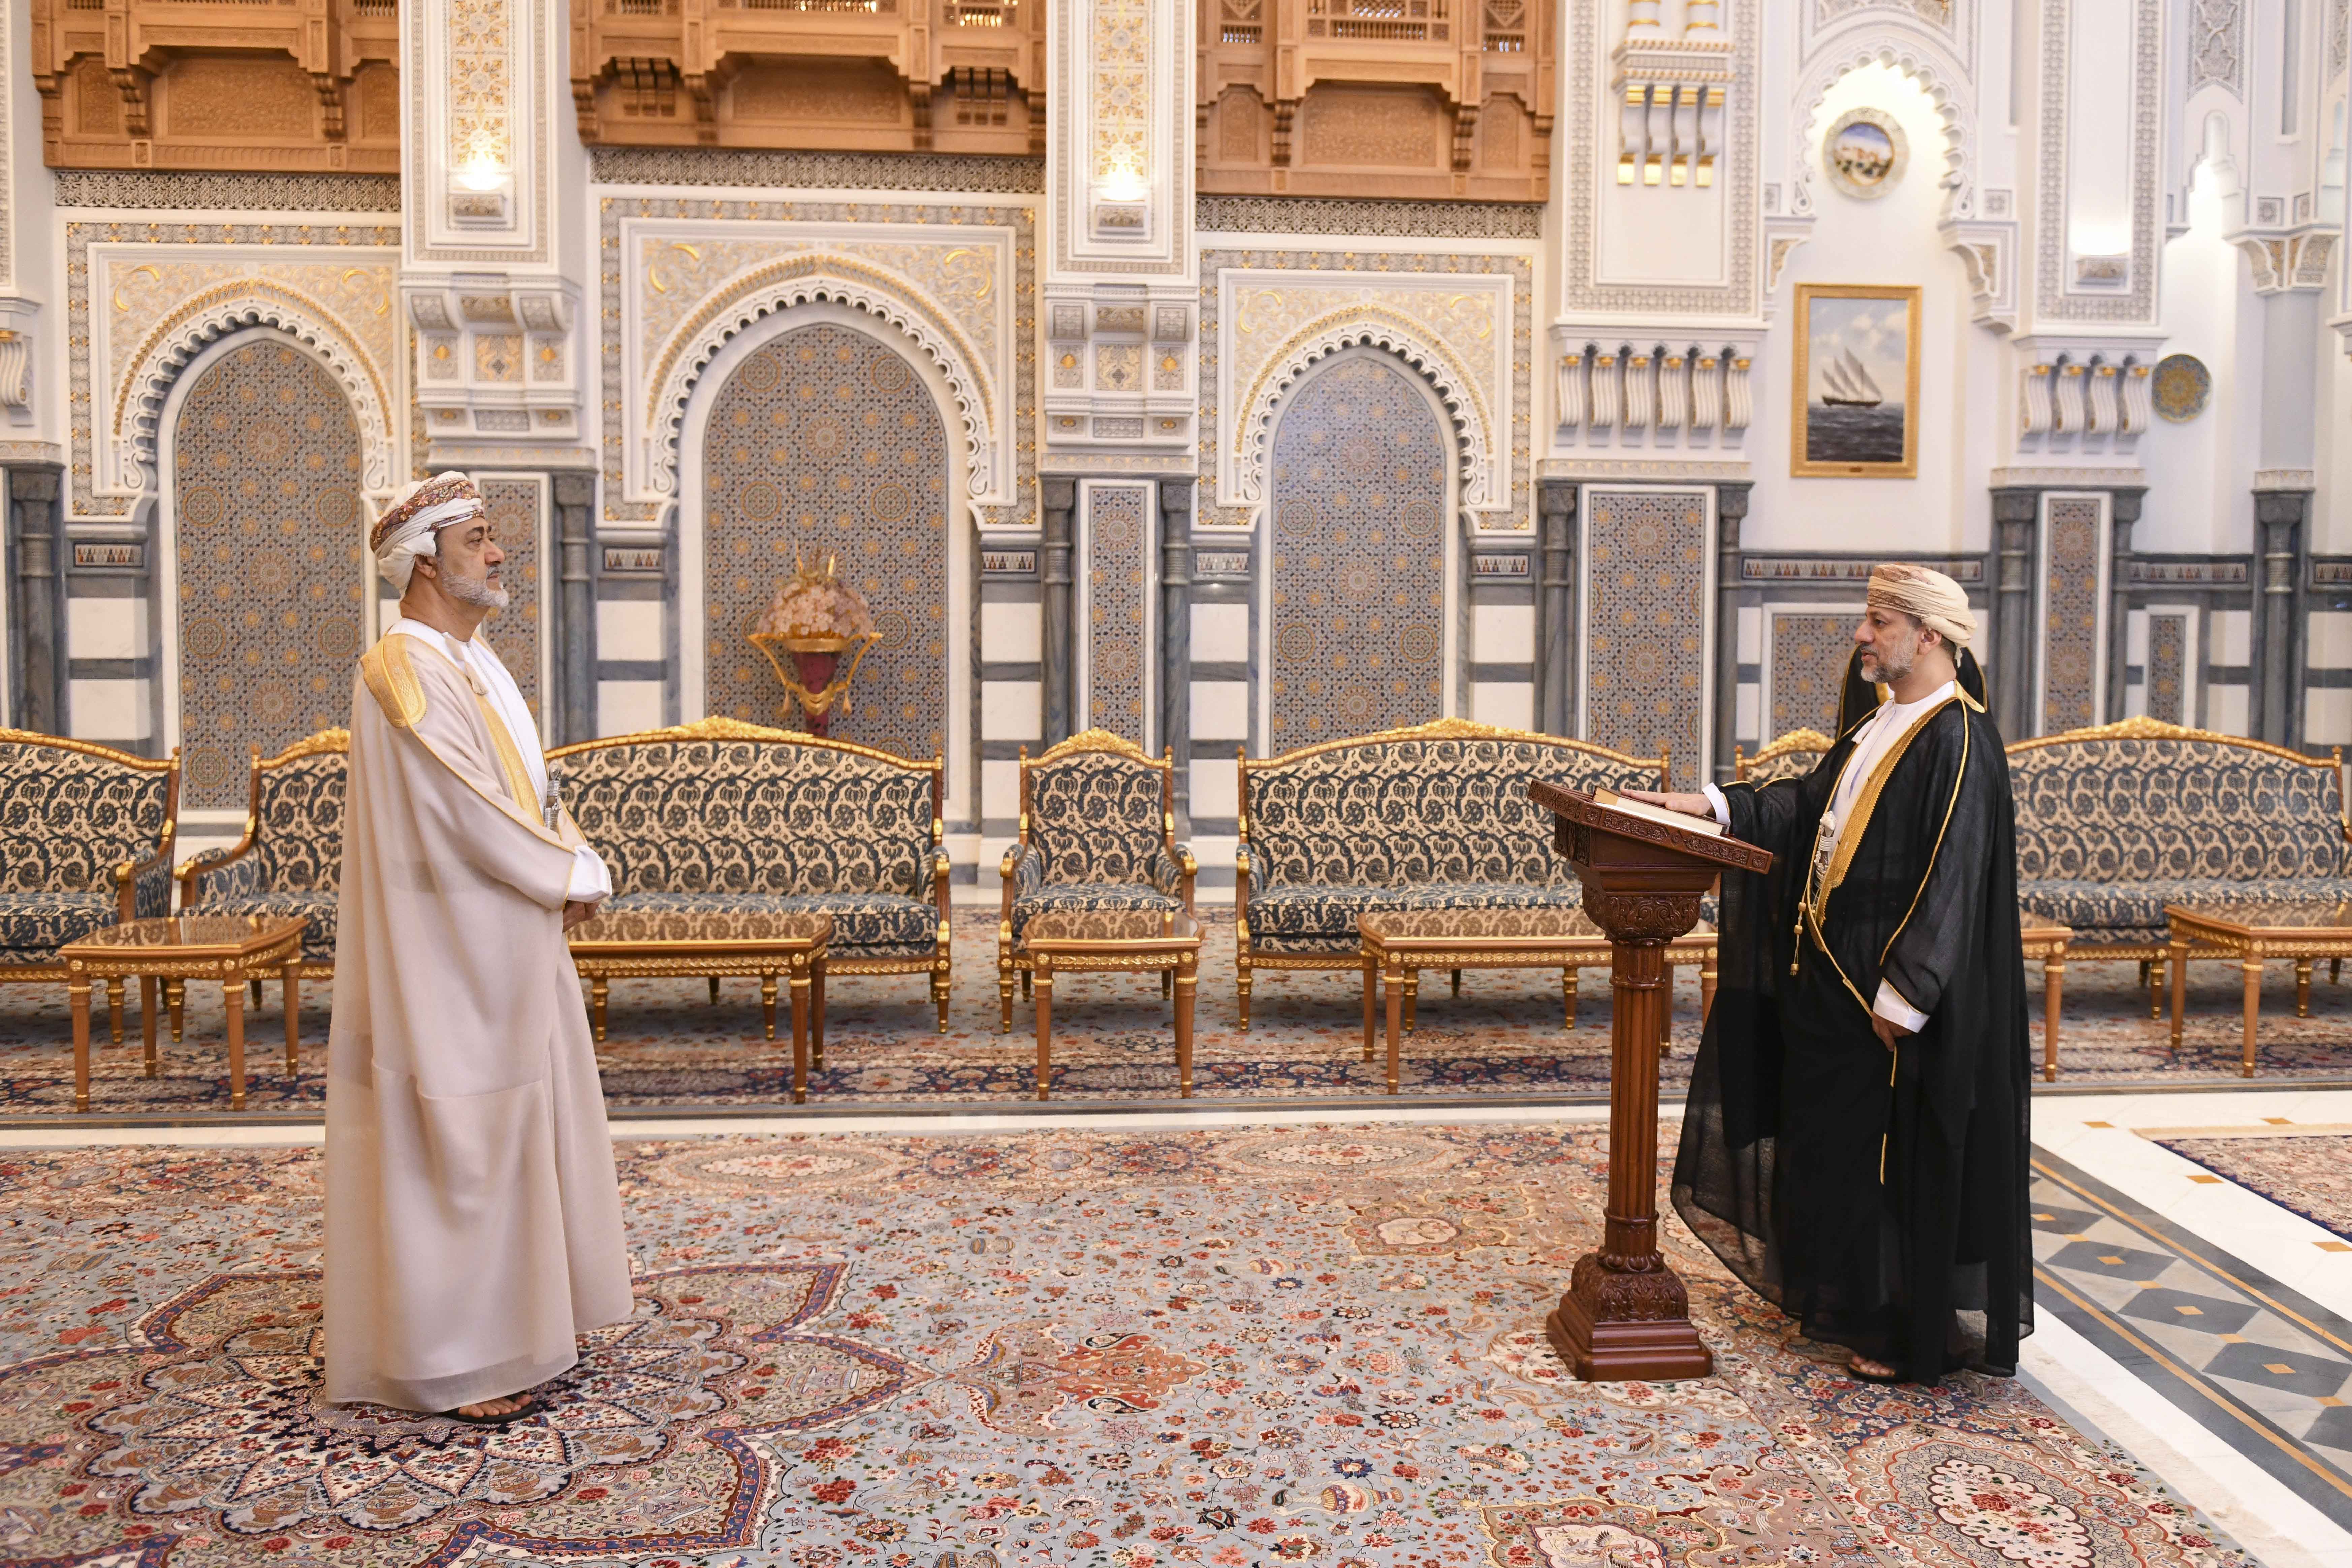 Before His Majesty, Oman Investment Authority’s head takes oath